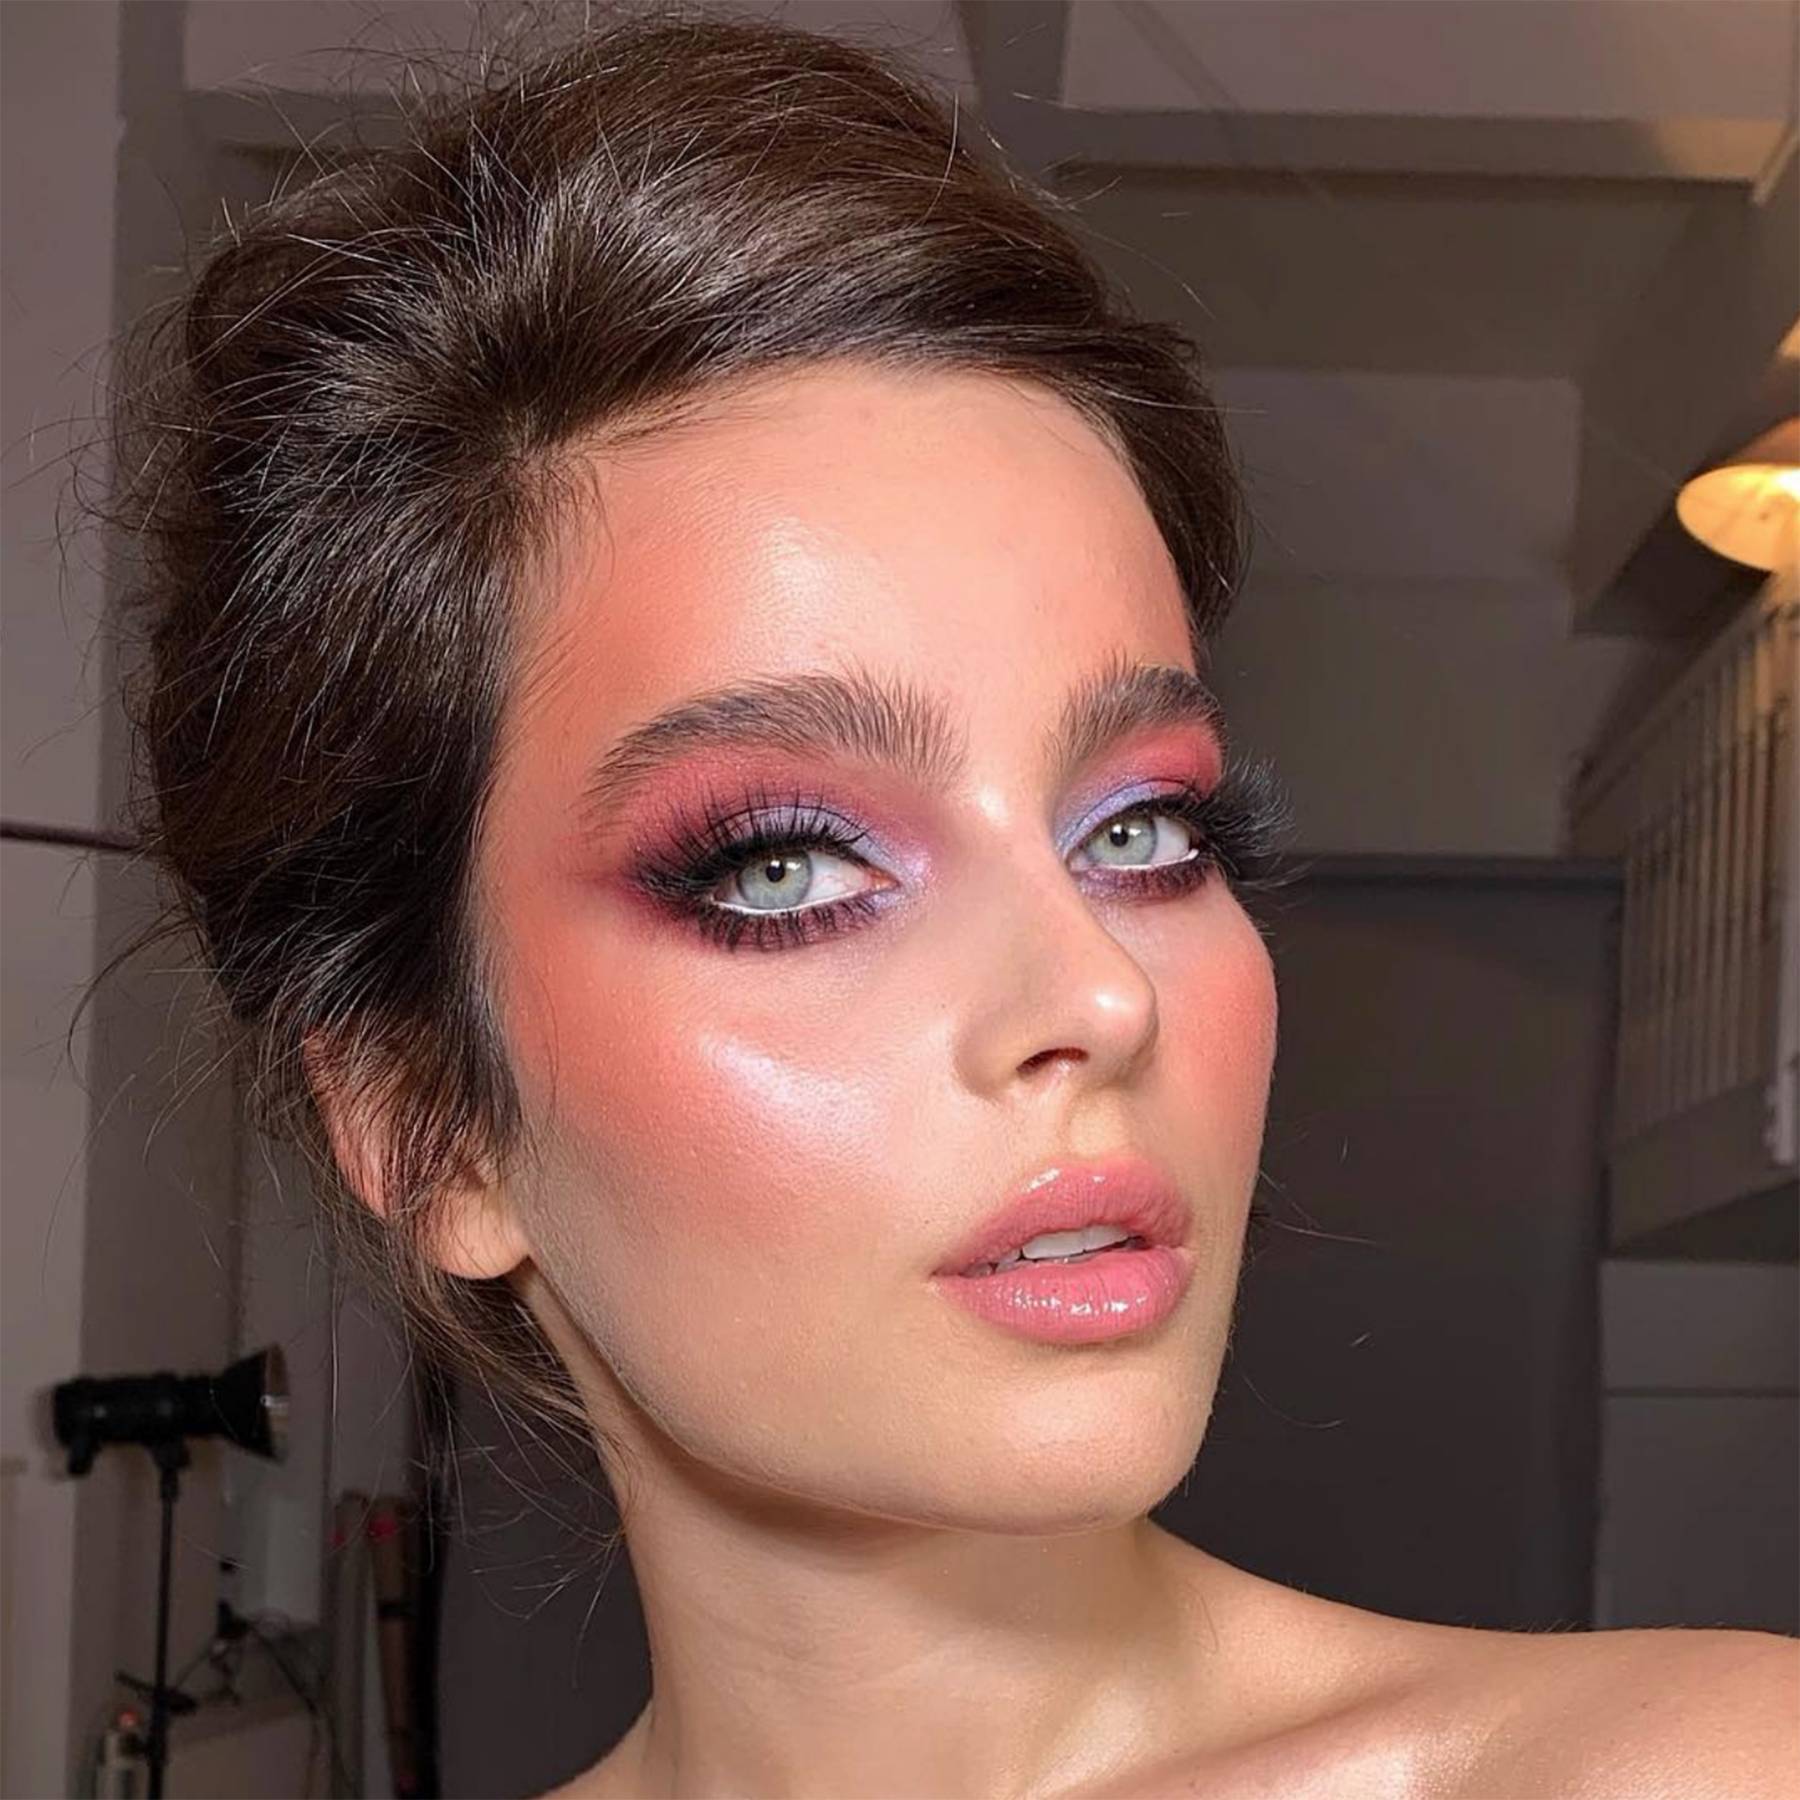 80s Makeup Ideas Looks Inspiration How To Wear The Trend The Modern Way Glamour Uk